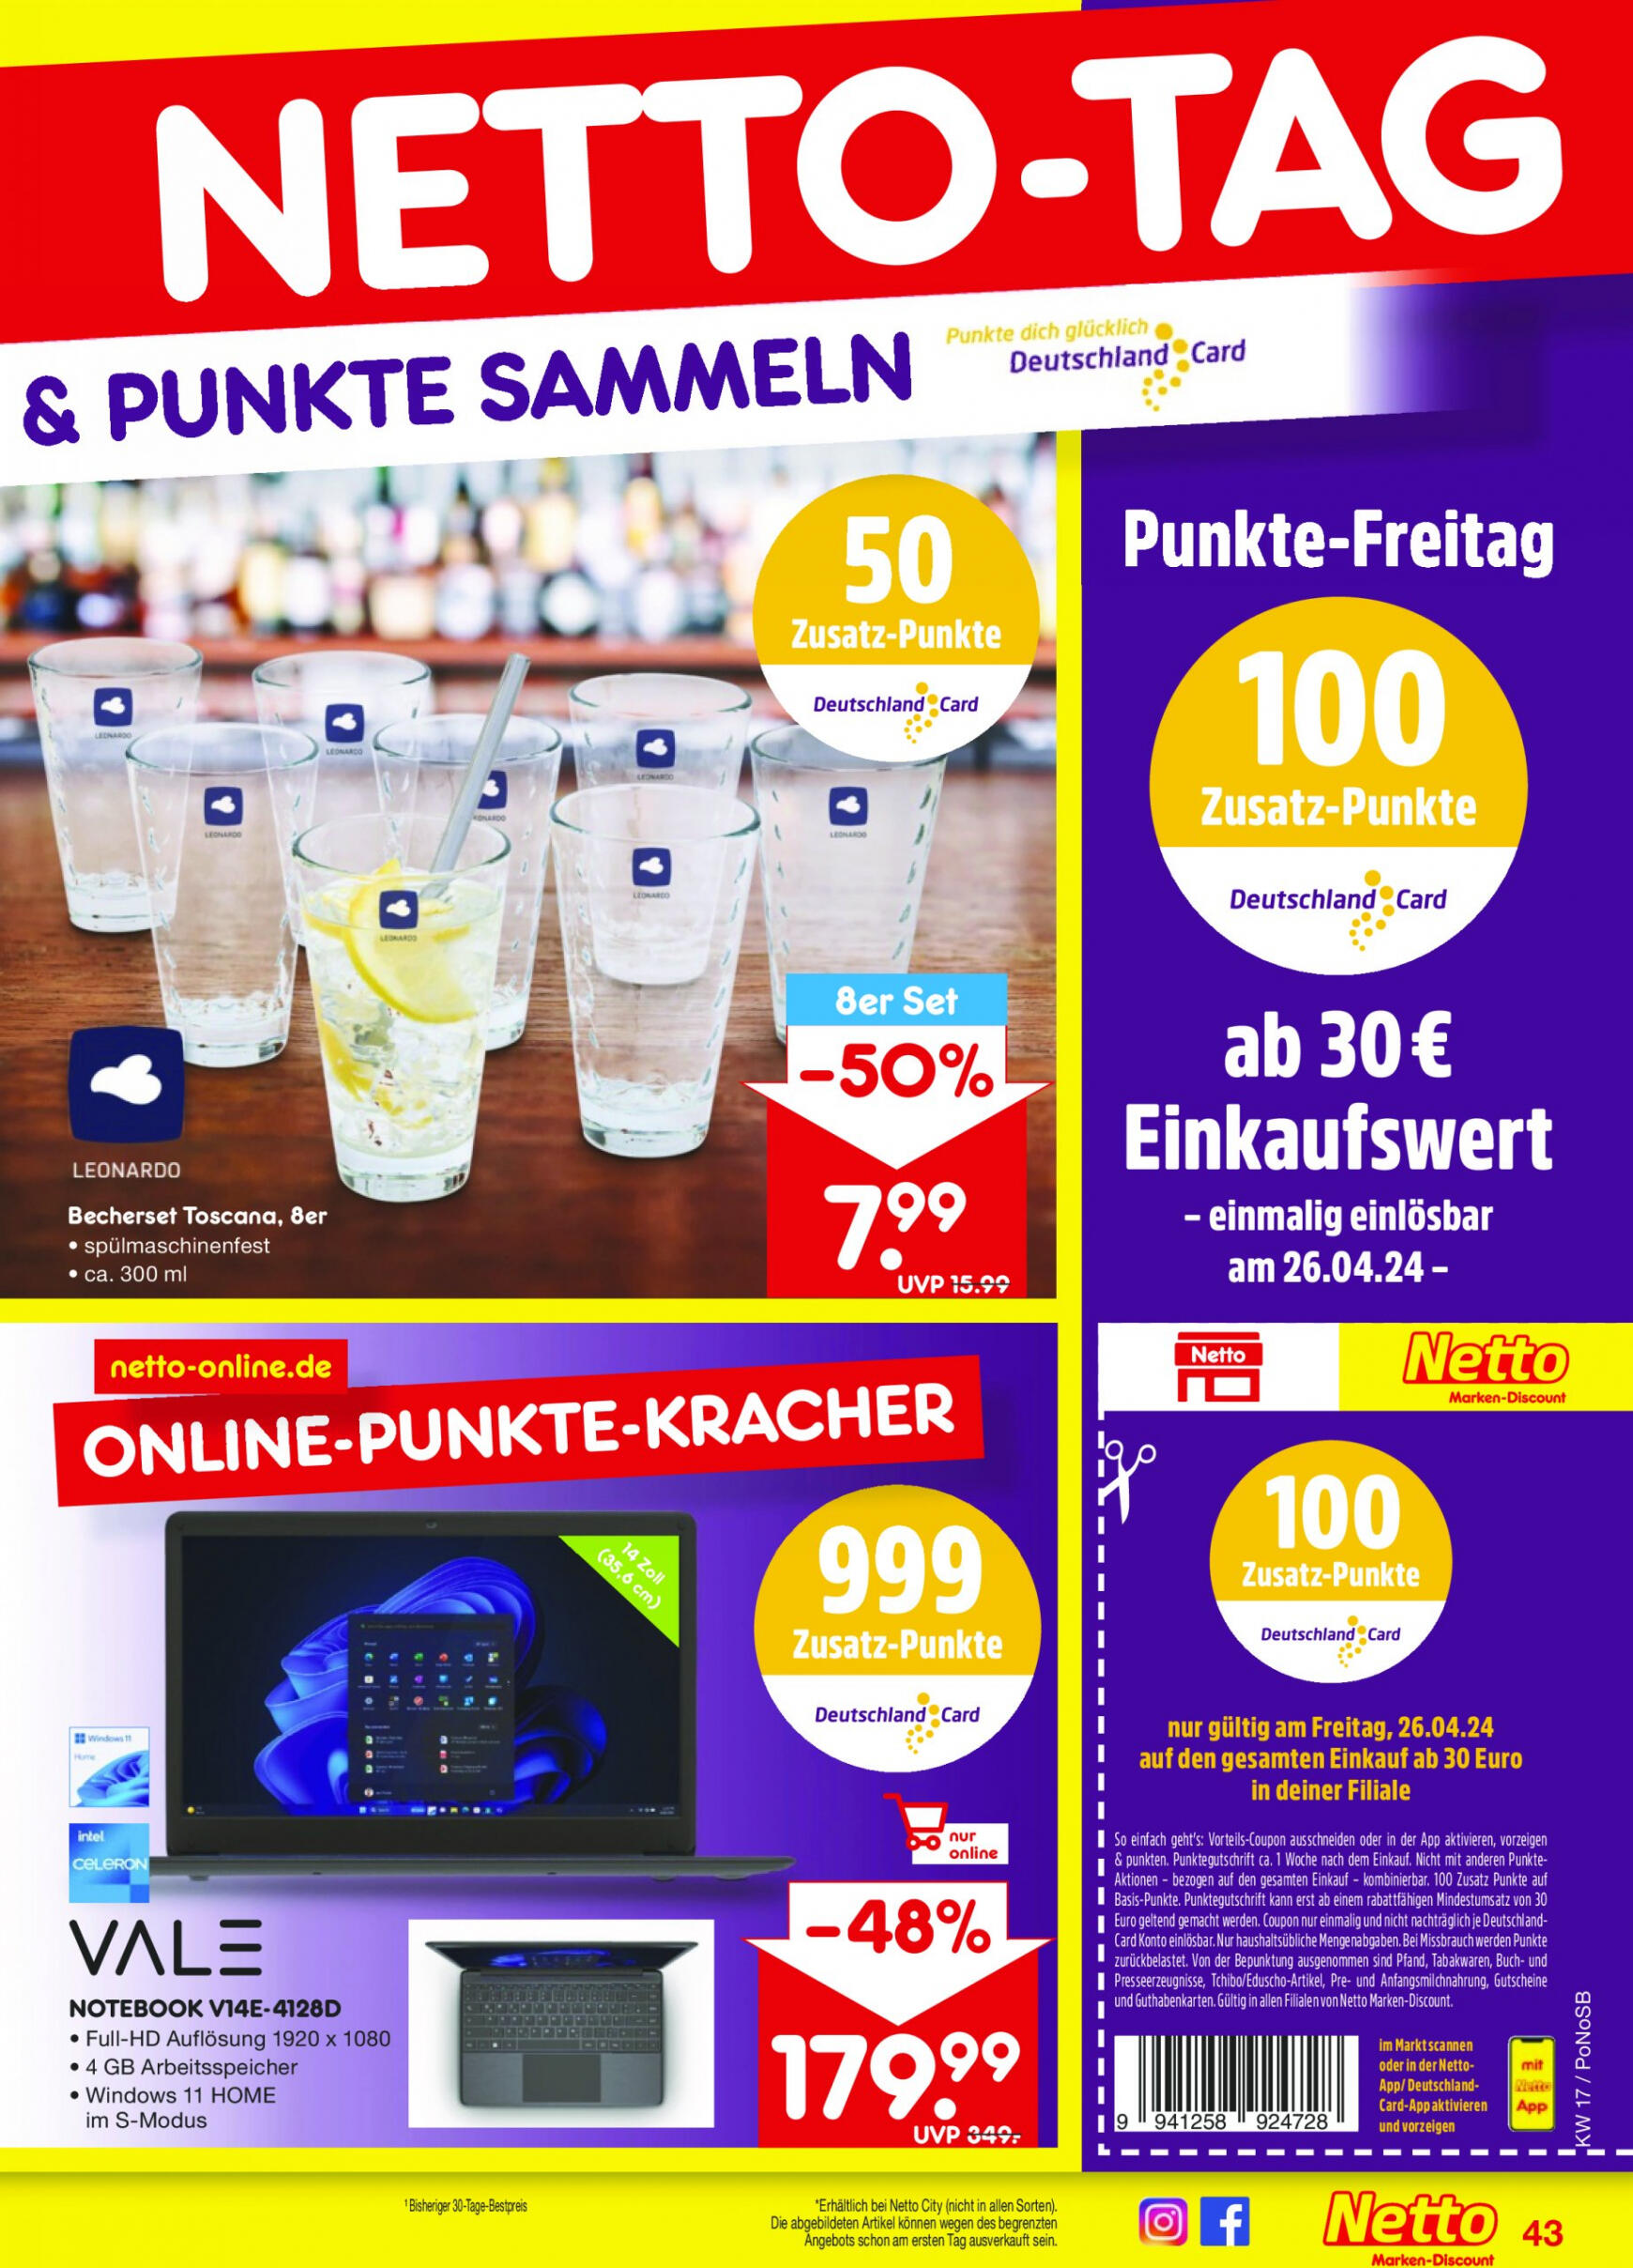 netto - Flyer Netto aktuell 22.04. - 27.04. - page: 49